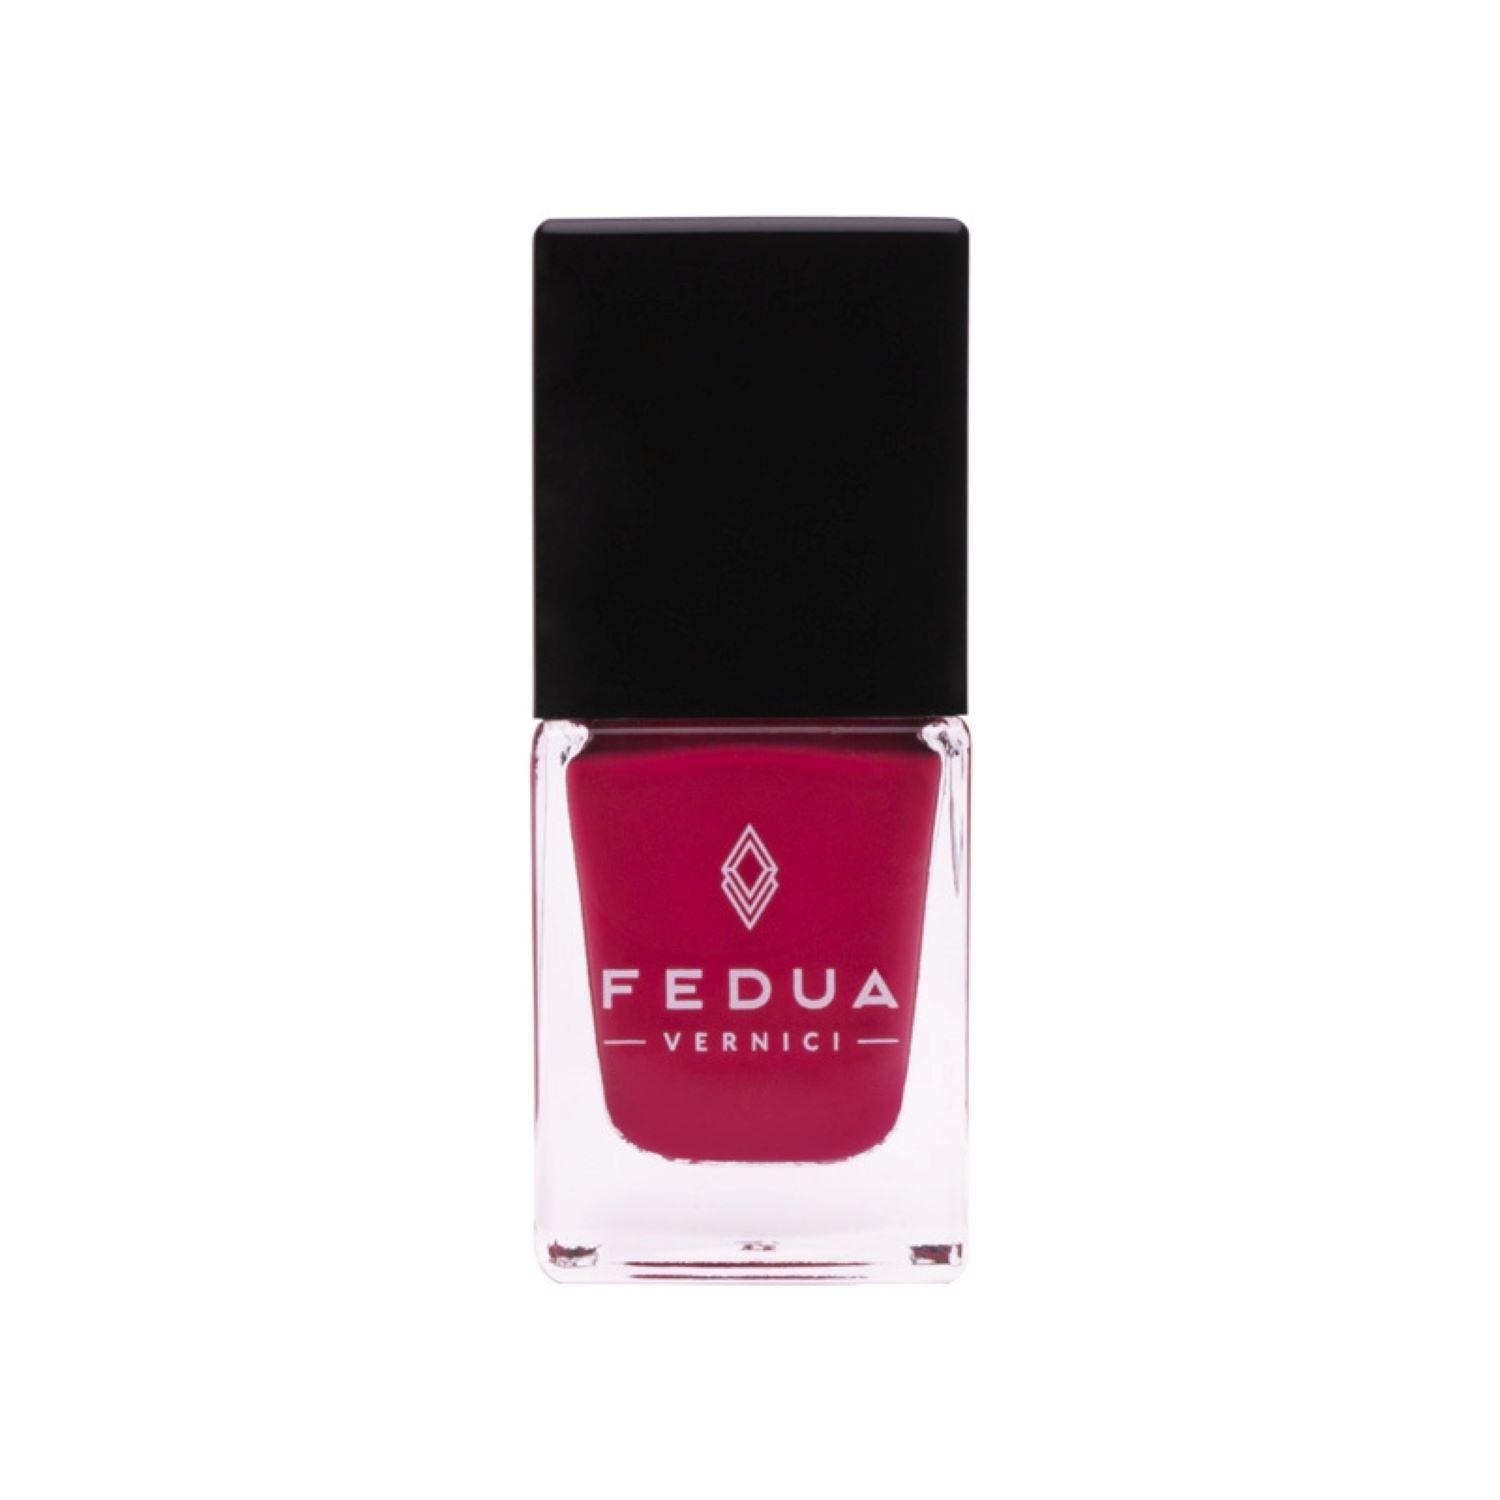 Red Cherry Nail Polish Can Box - Beauty Ethic